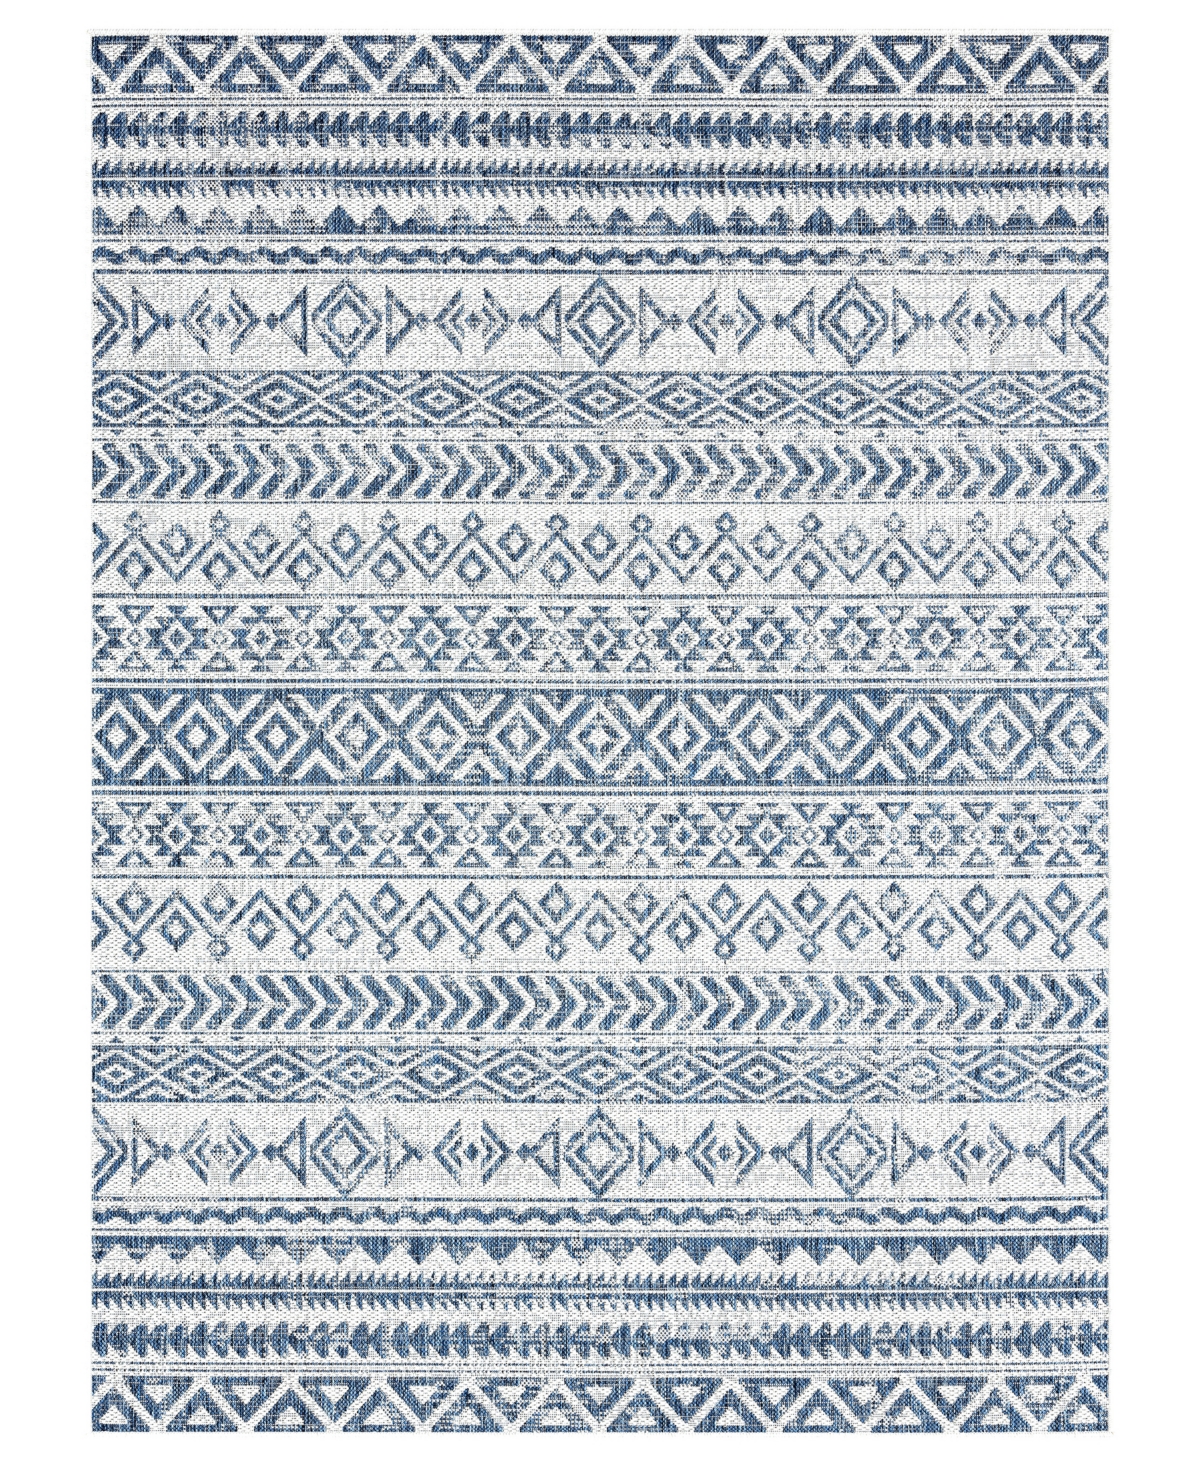 Nicole Miller Patio Country Odina 5'2" X 7'2" Area Rug In Navy